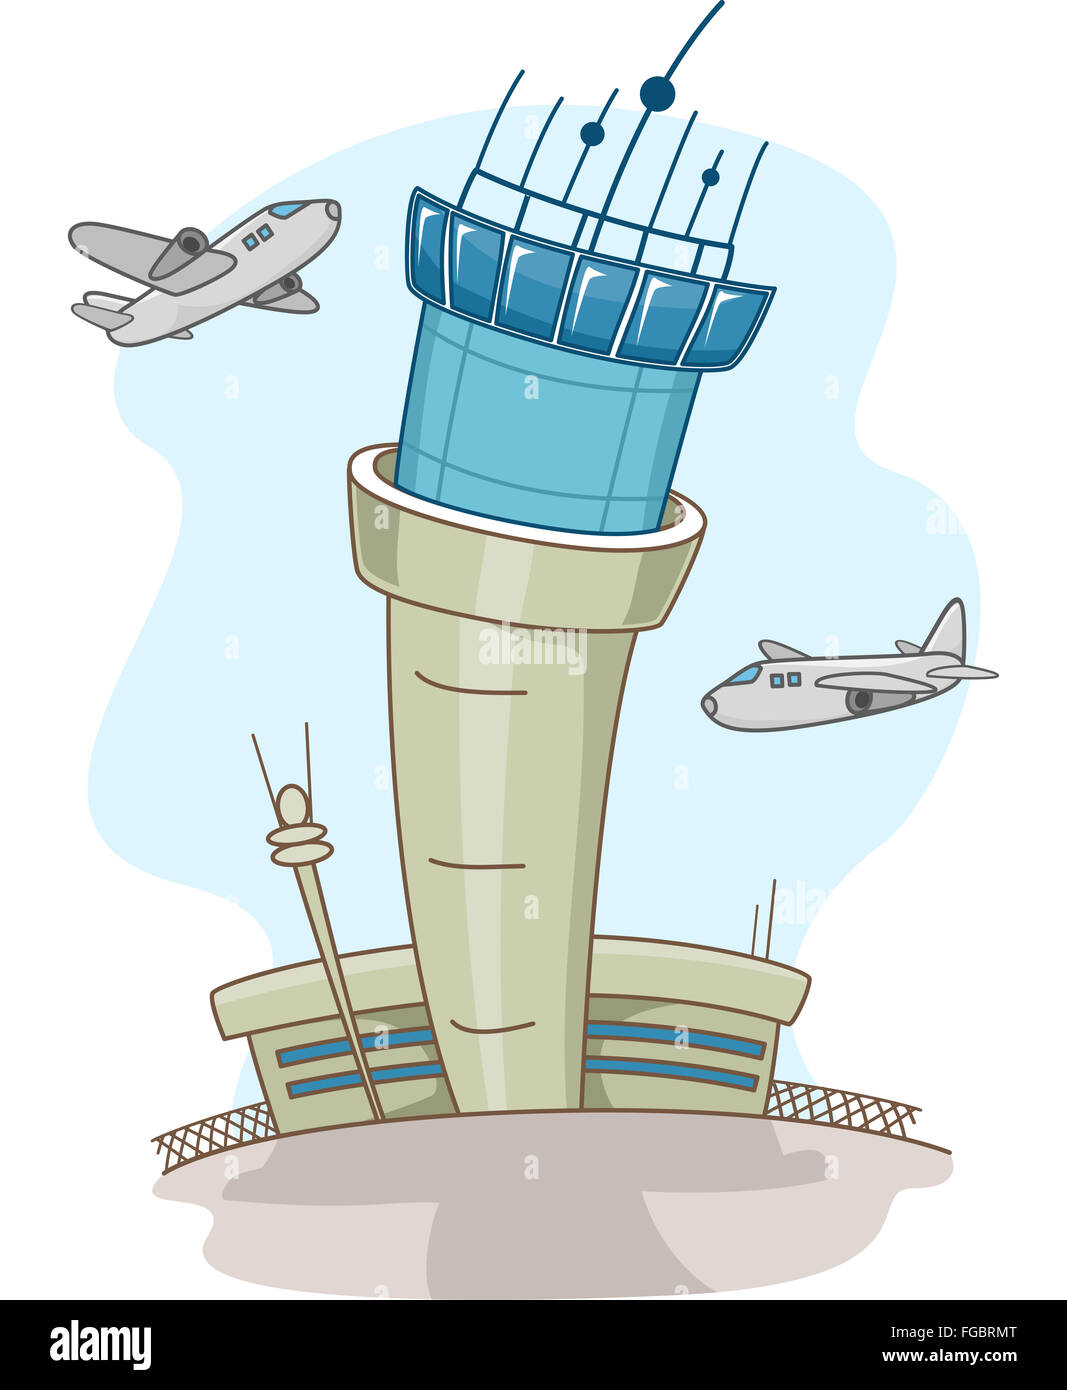 Illustration of Airplanes Circling Around a Control Tower Stock Photo